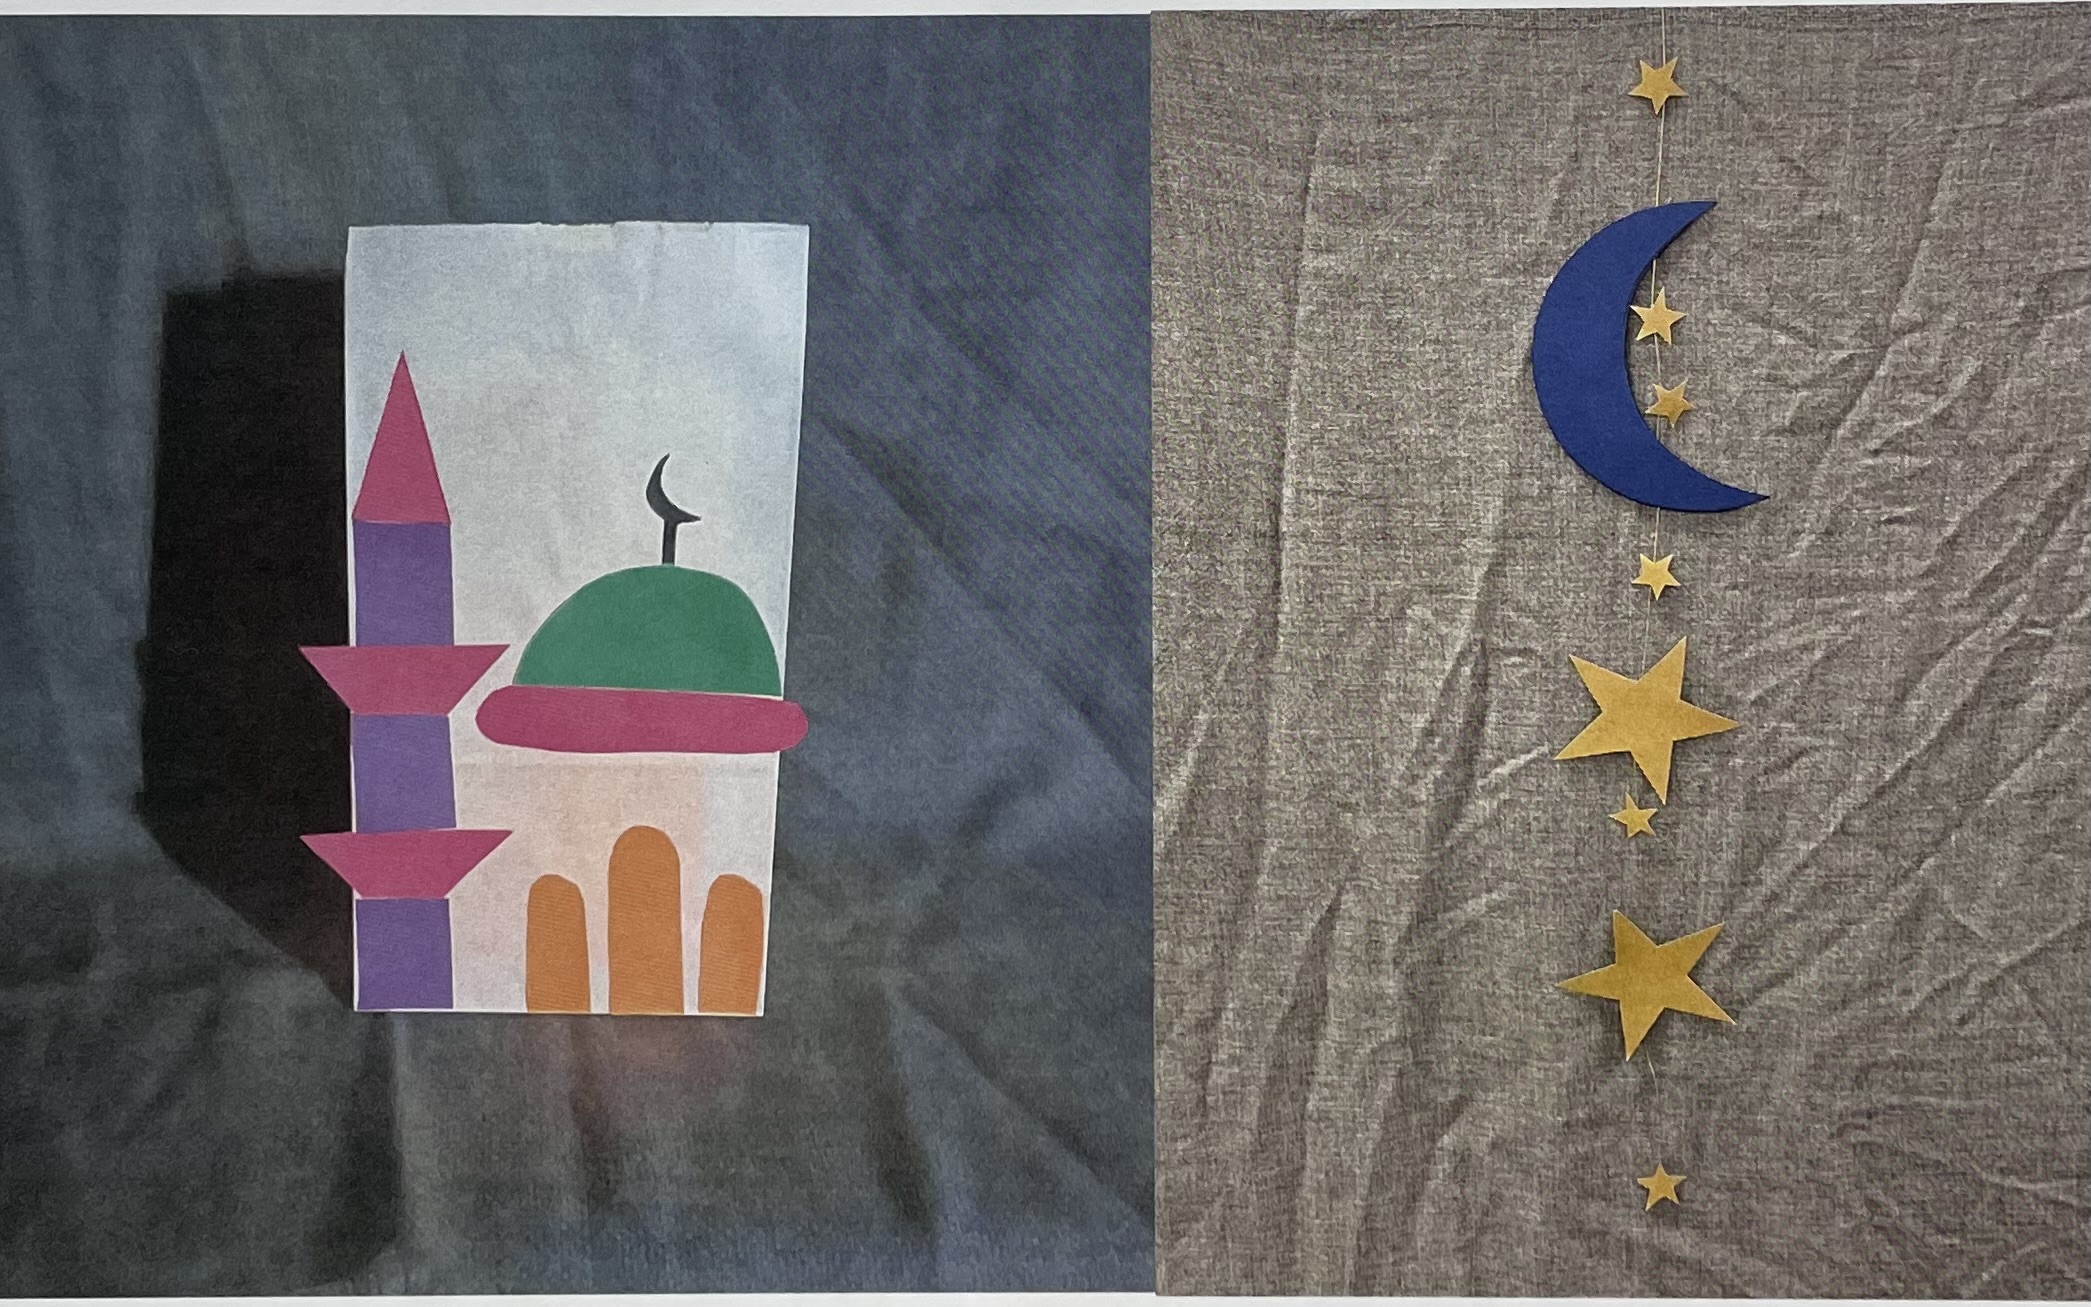 Mosque luminary and Crescent Moon and stars wallhanging